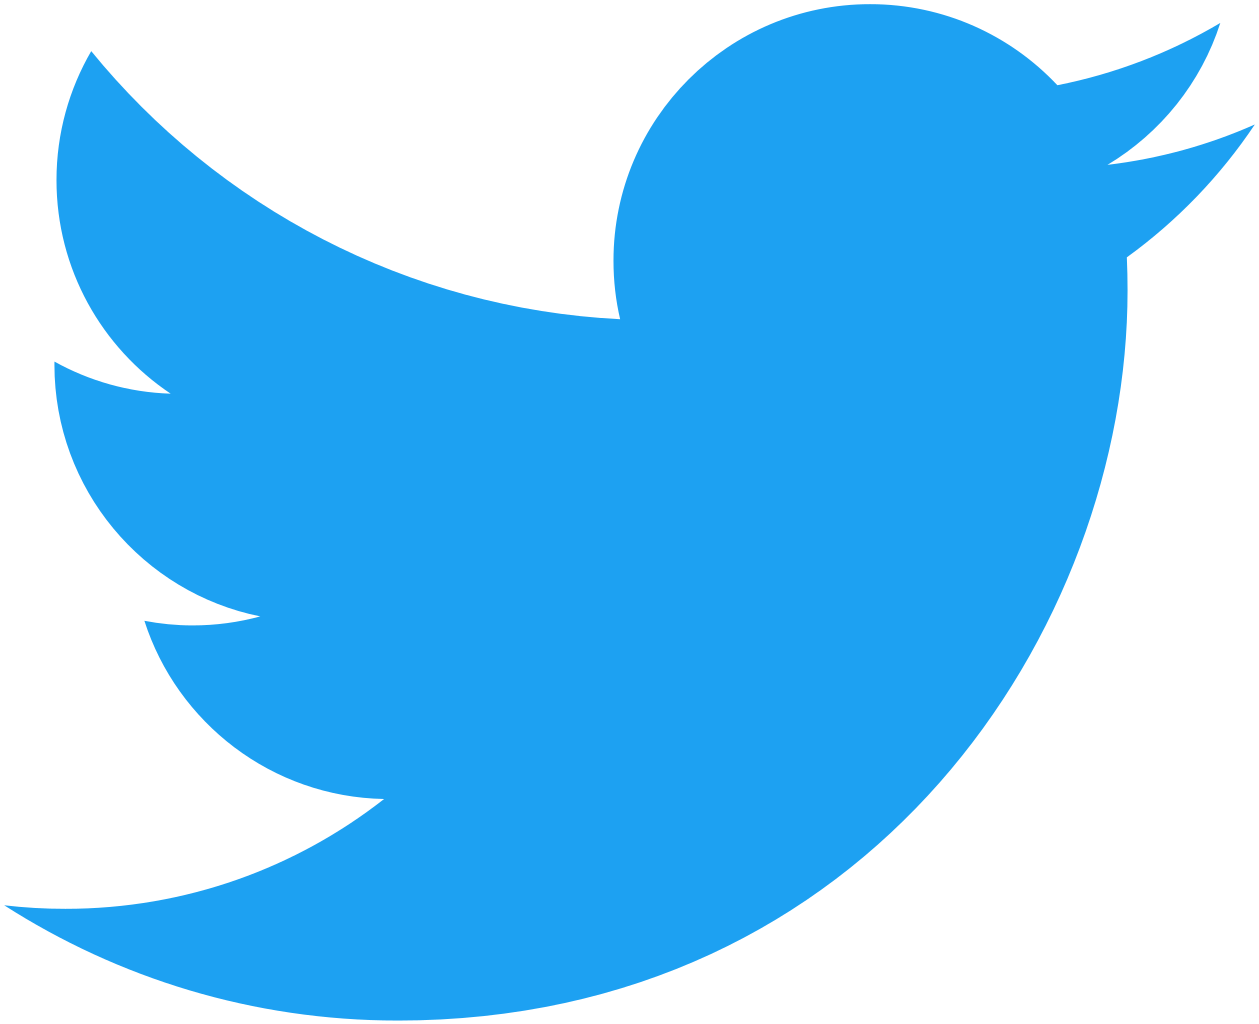 The Twitter logo is a light blue silhouette of a bird with an open beak and outstretched wings. 